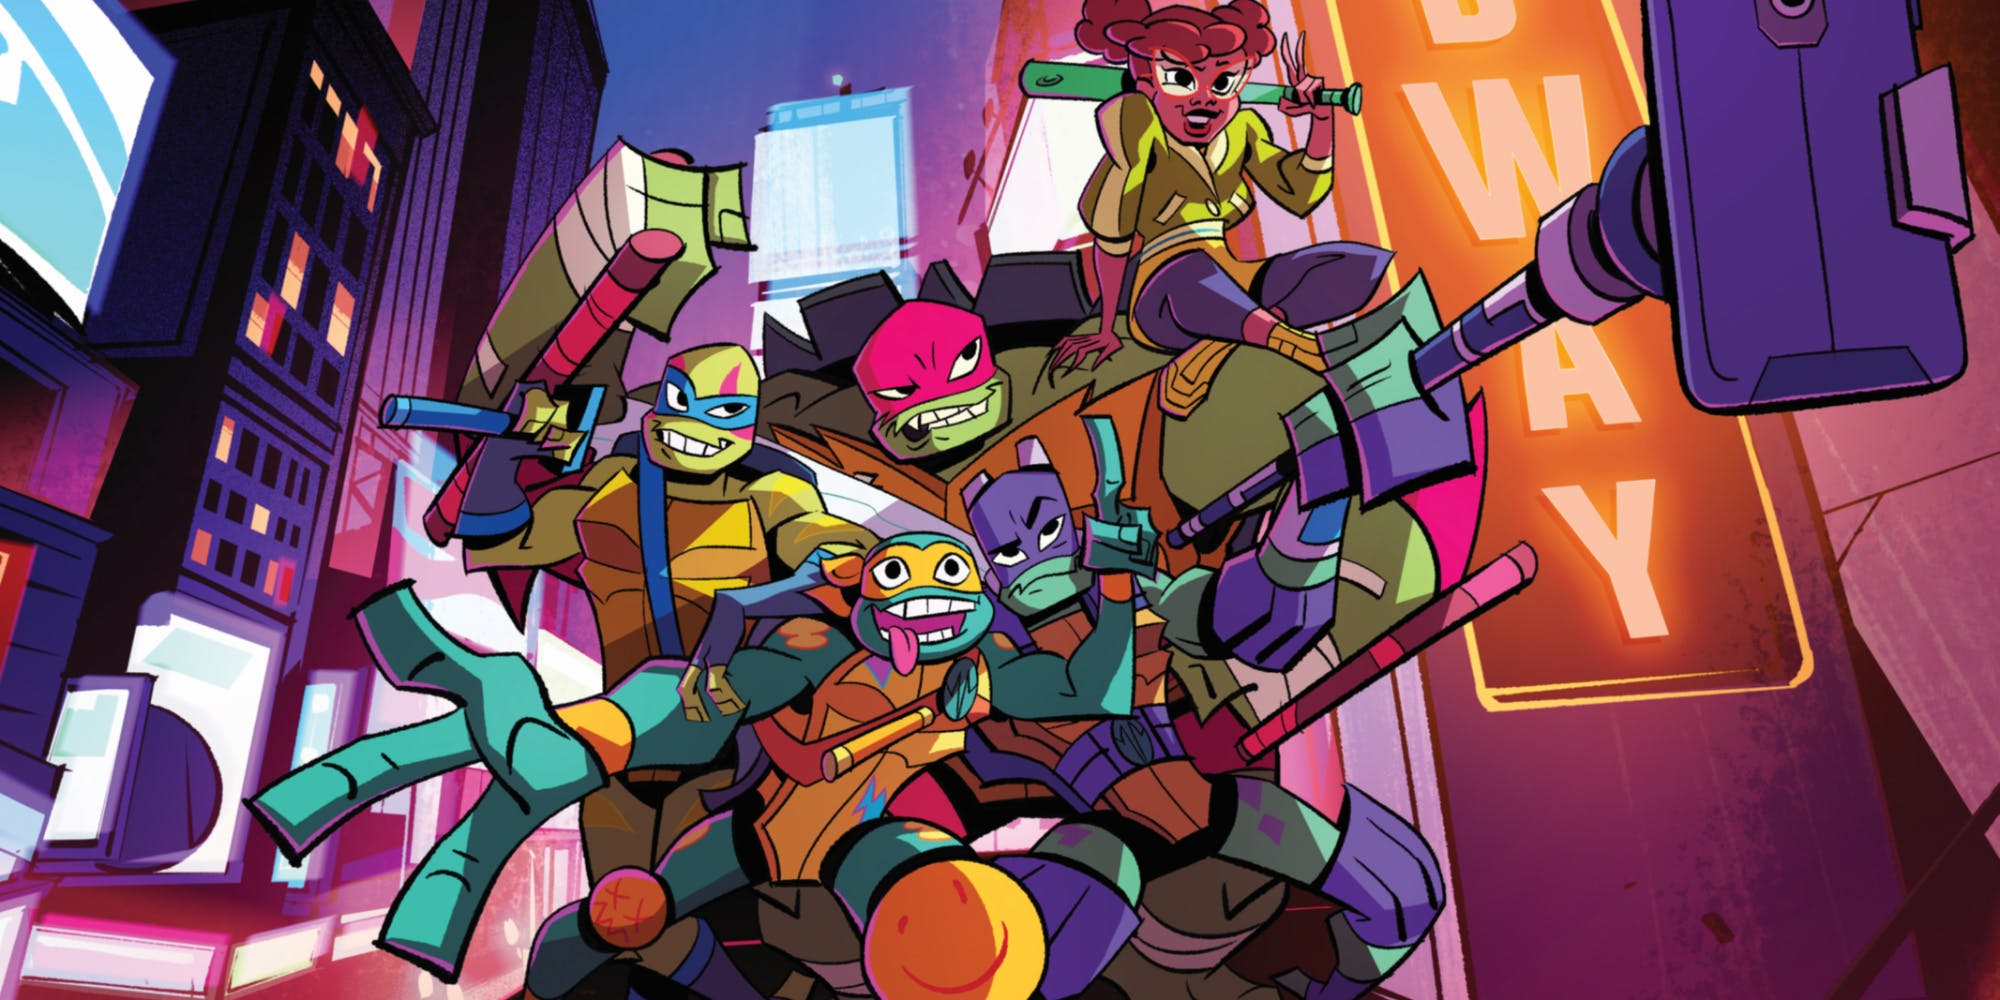 All you need to know: Rise of the Teenage Mutant Ninja Turtles